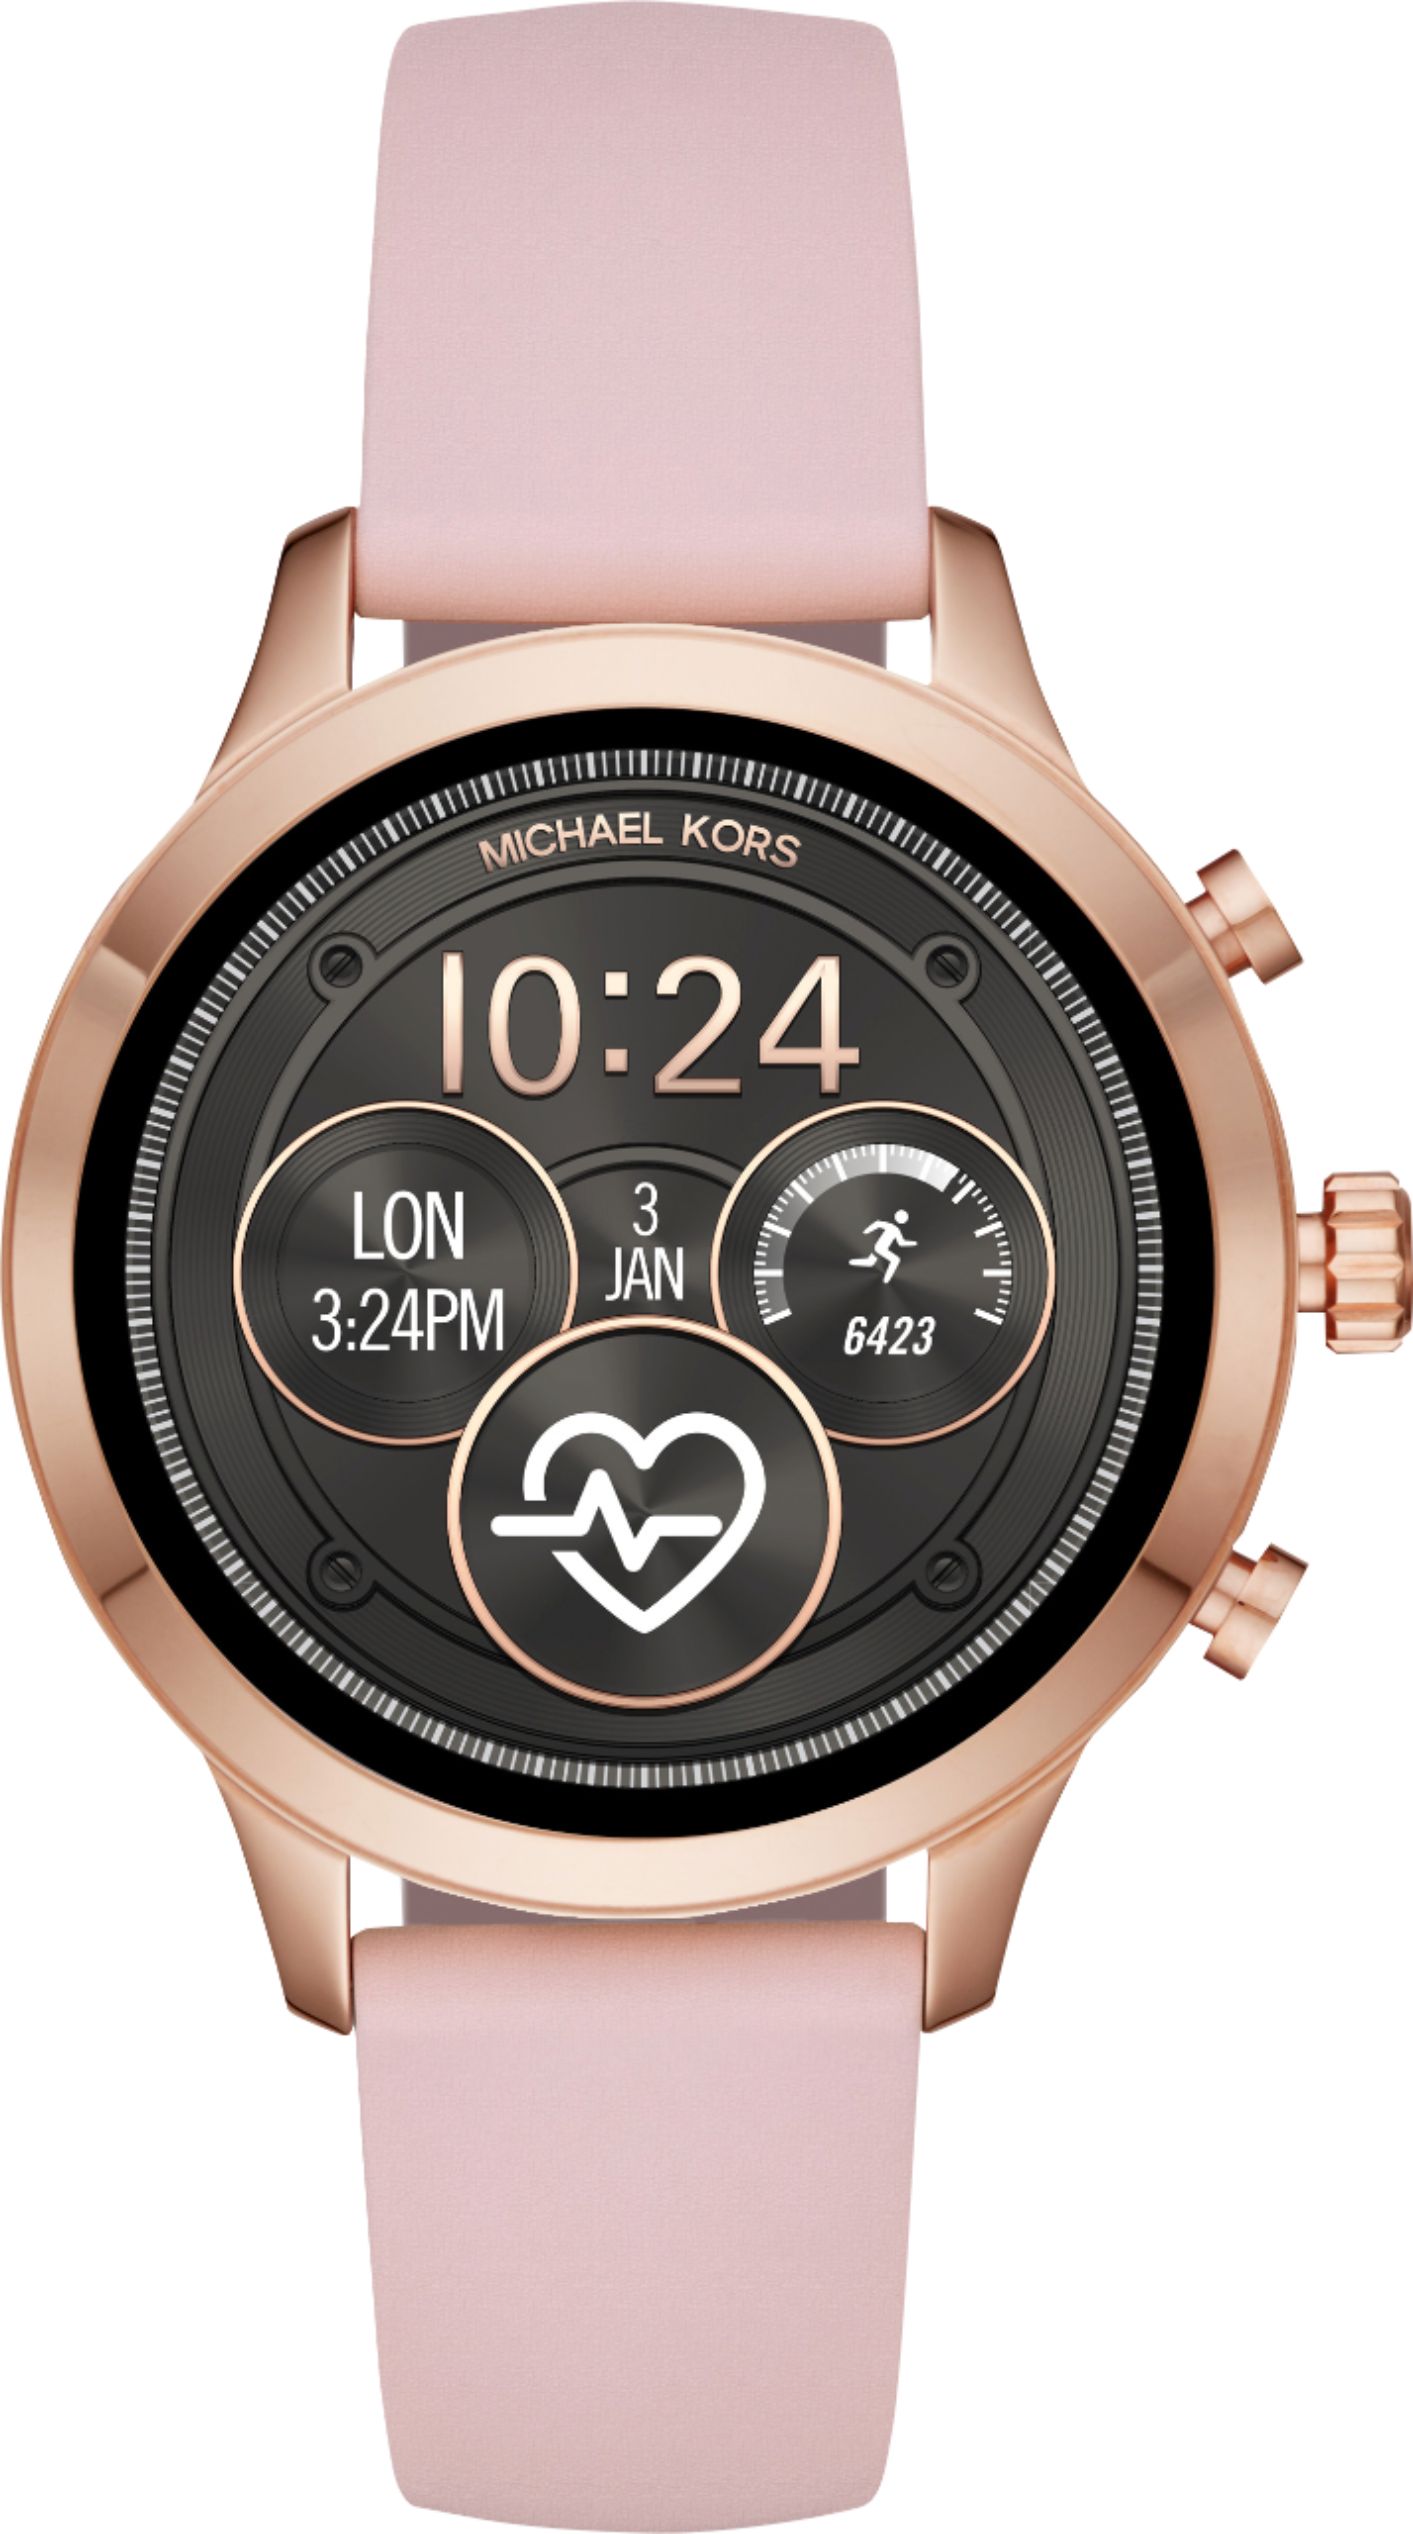 michael kors watch charger best buy